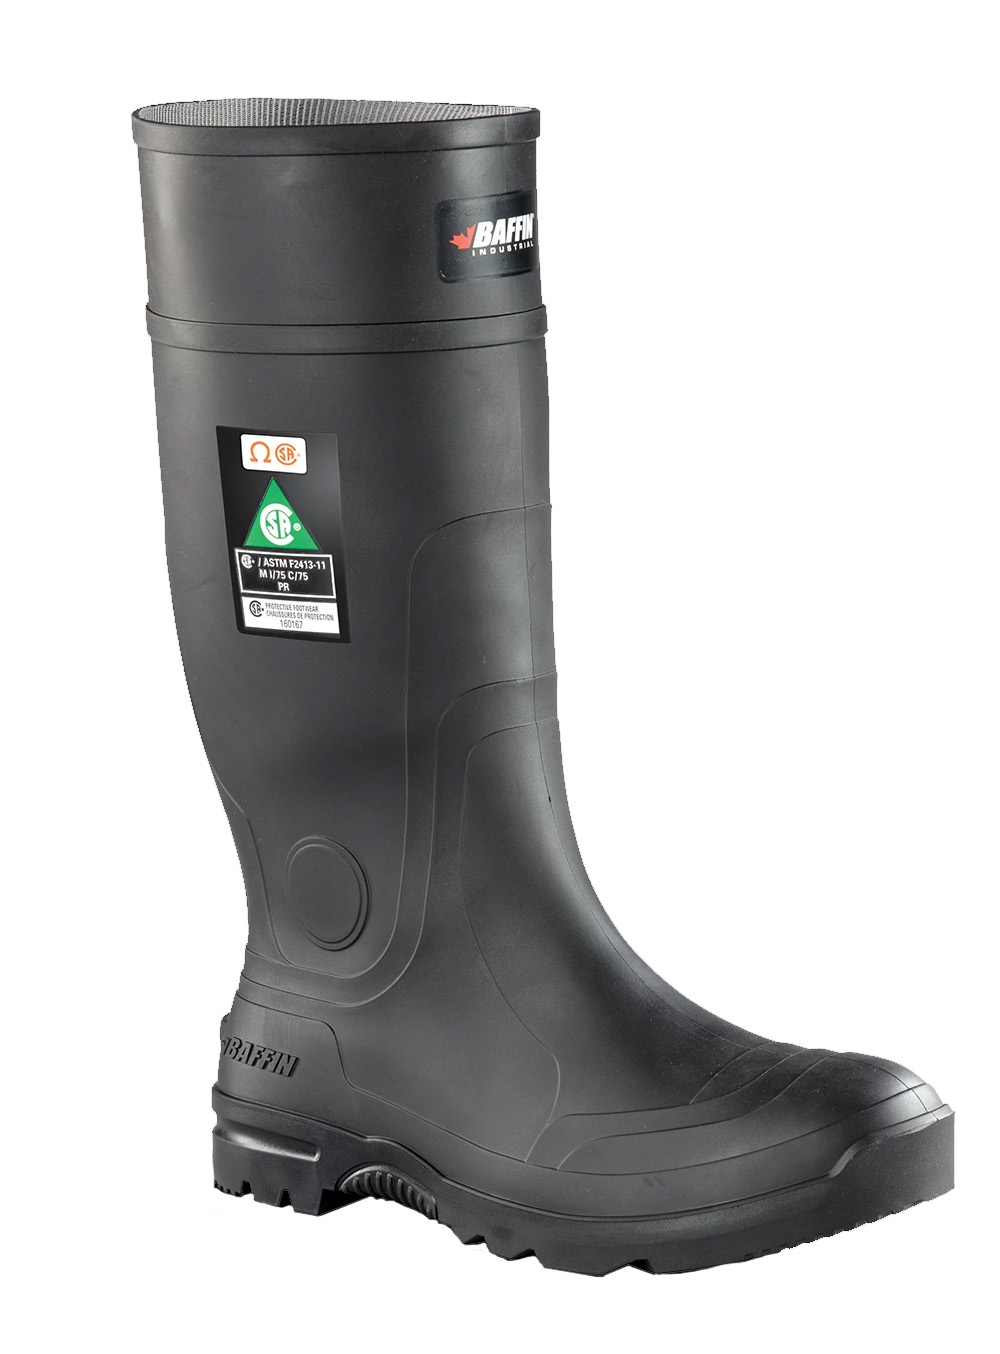 Industrial Boot Safety Toe and Plate Baffin Unisex-Adult Blackhawk 